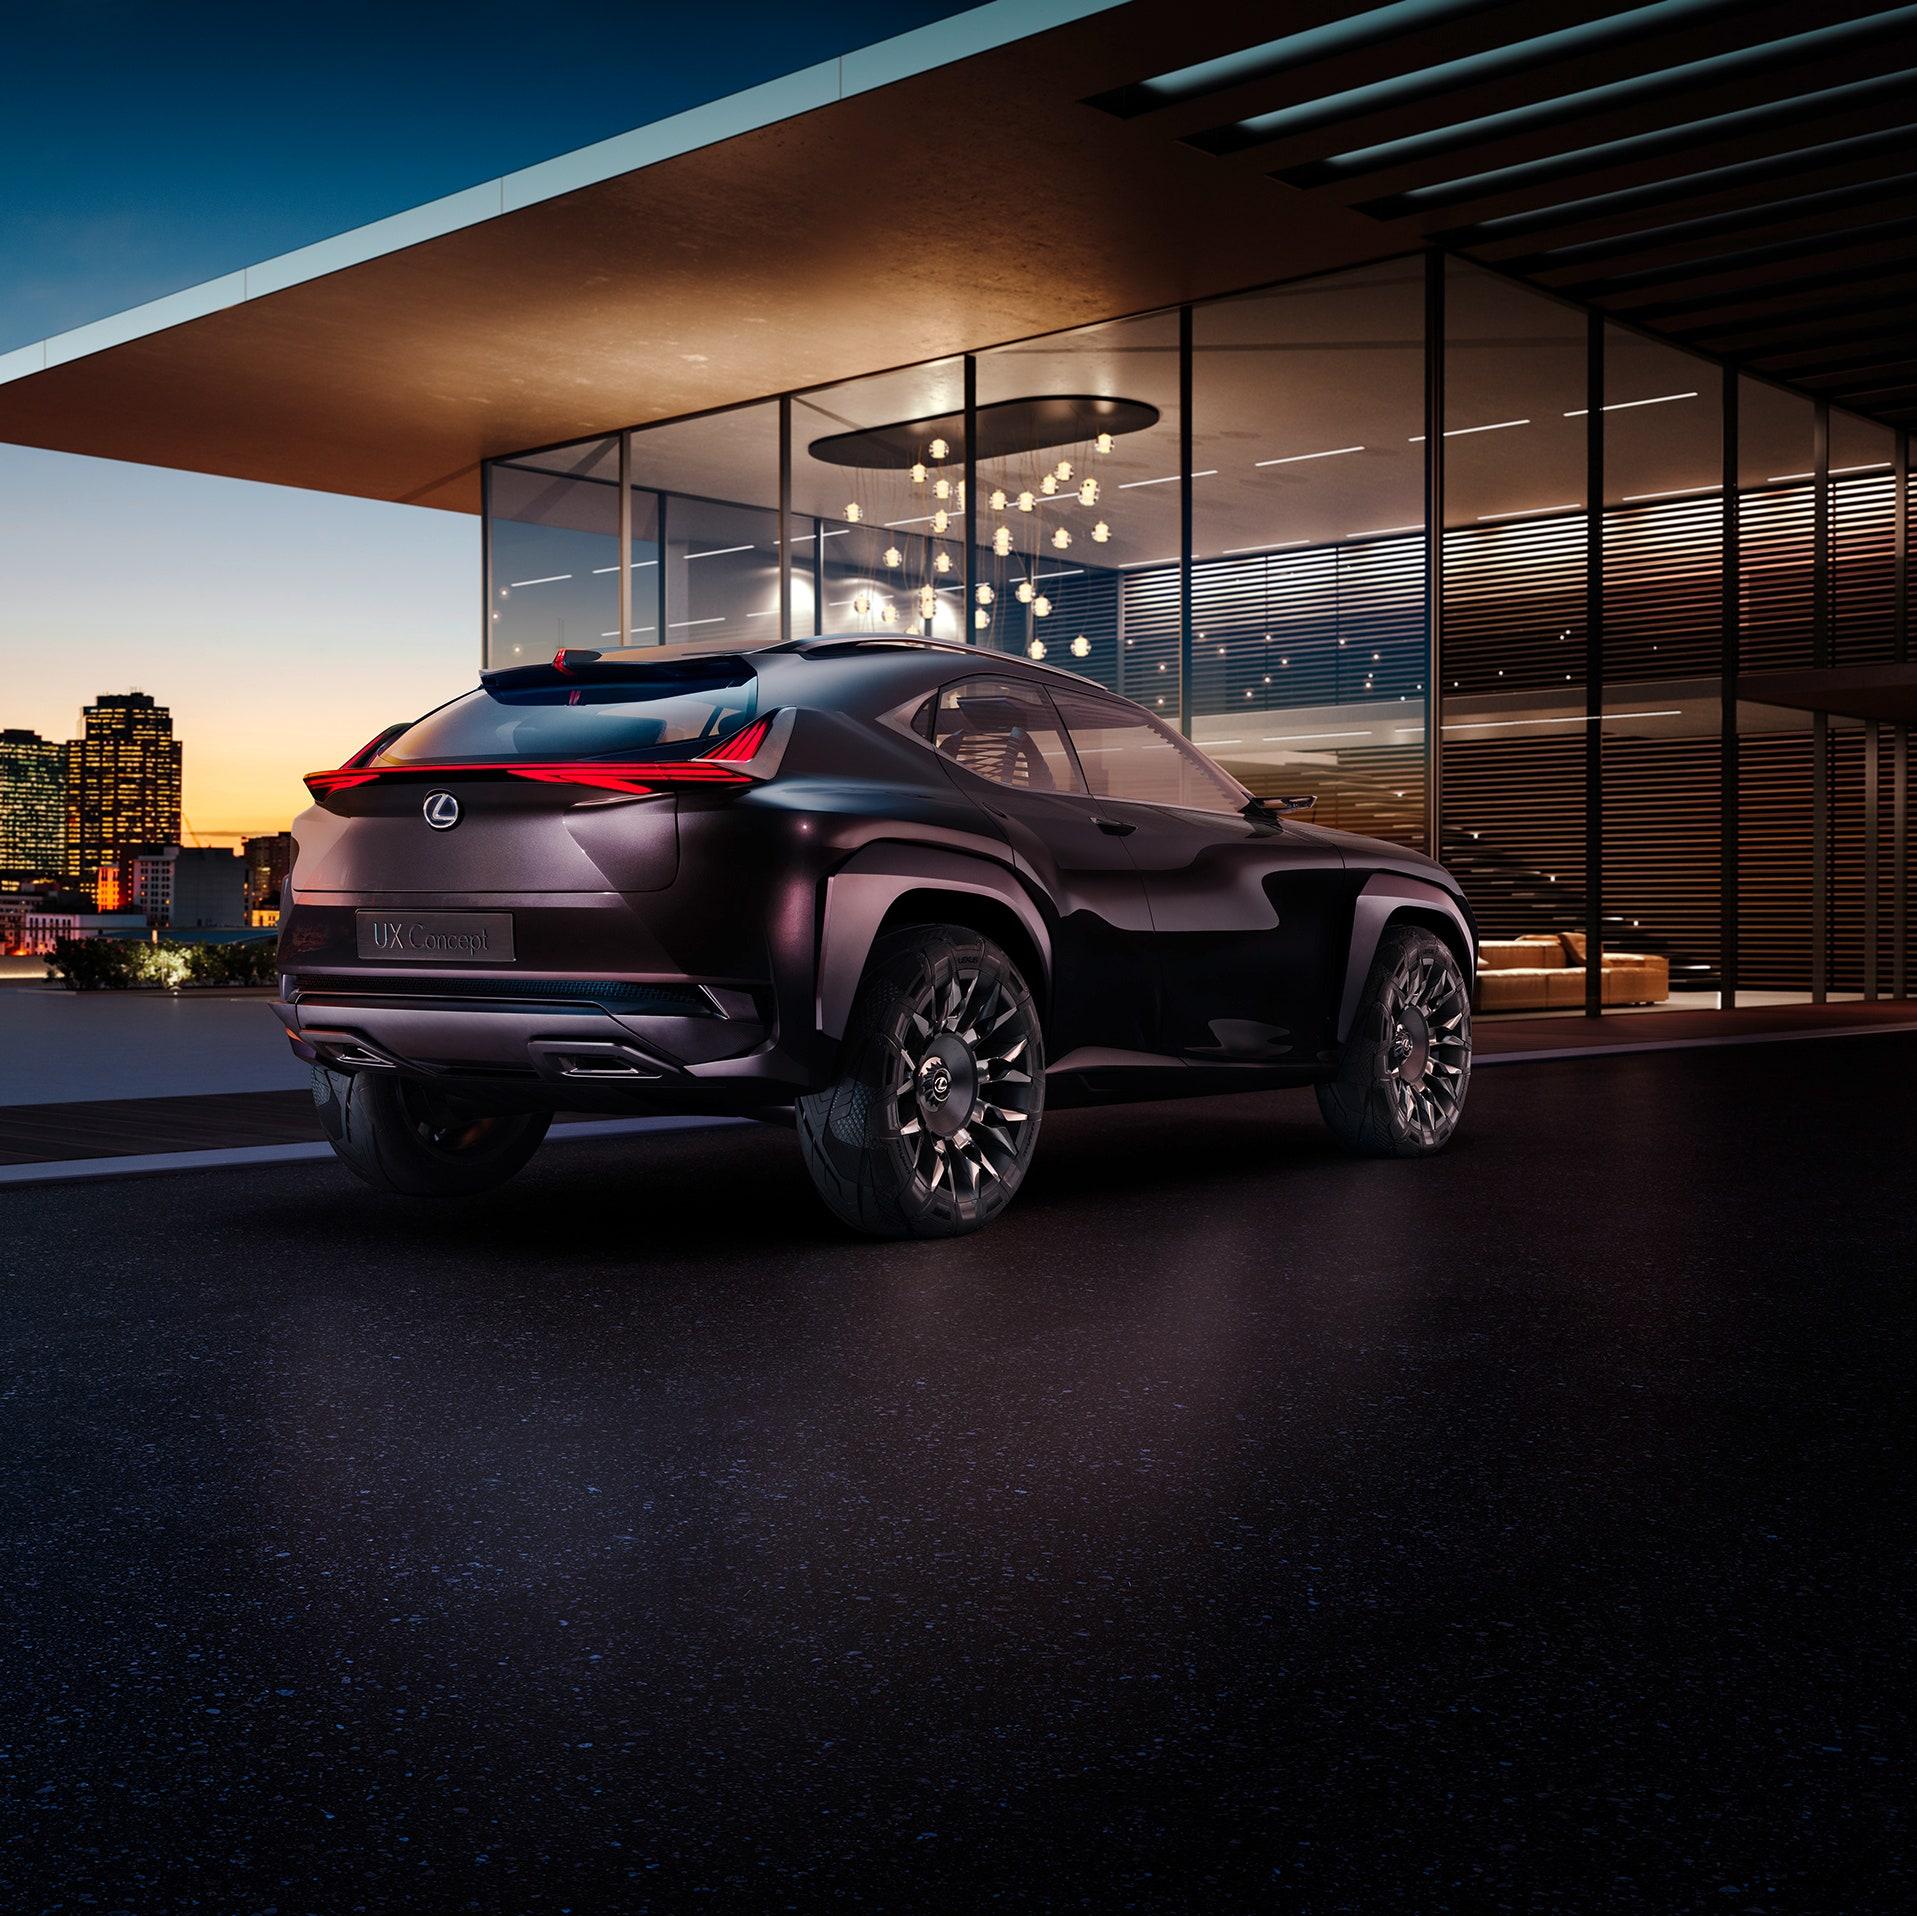 Lexus Goes Mirrorless With Its New Ux Concept Suv Architectural